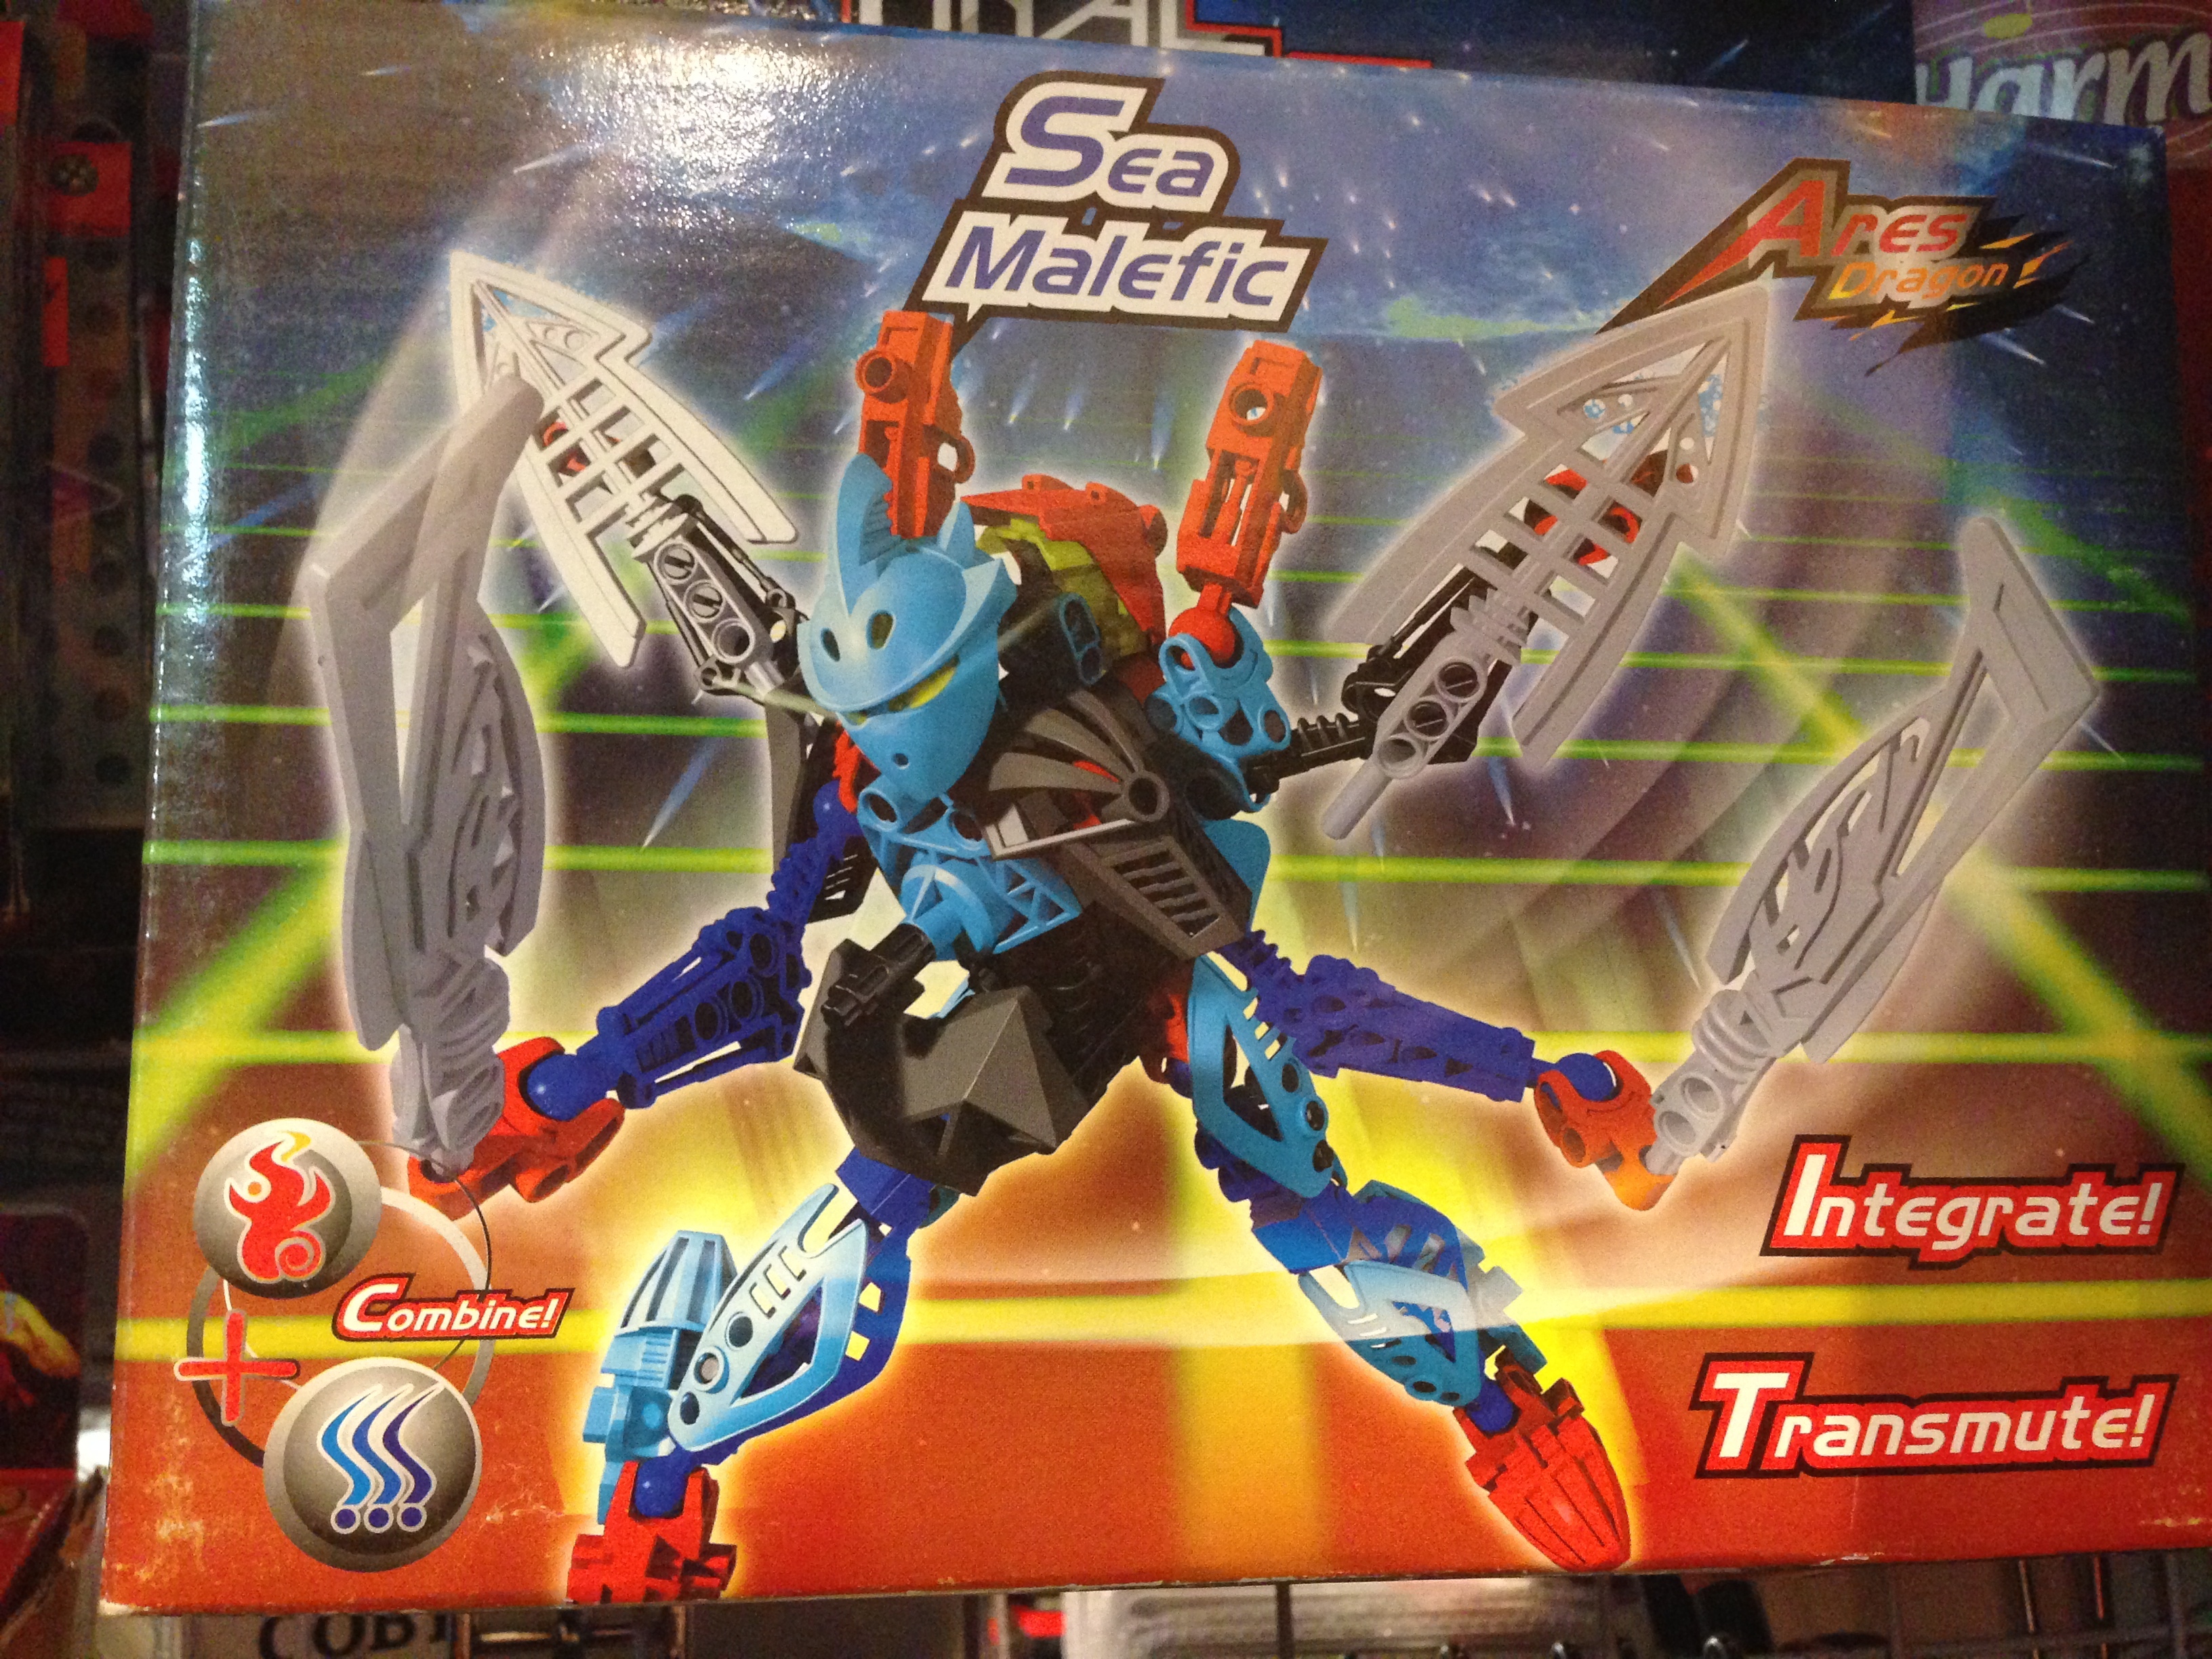 bionicle products